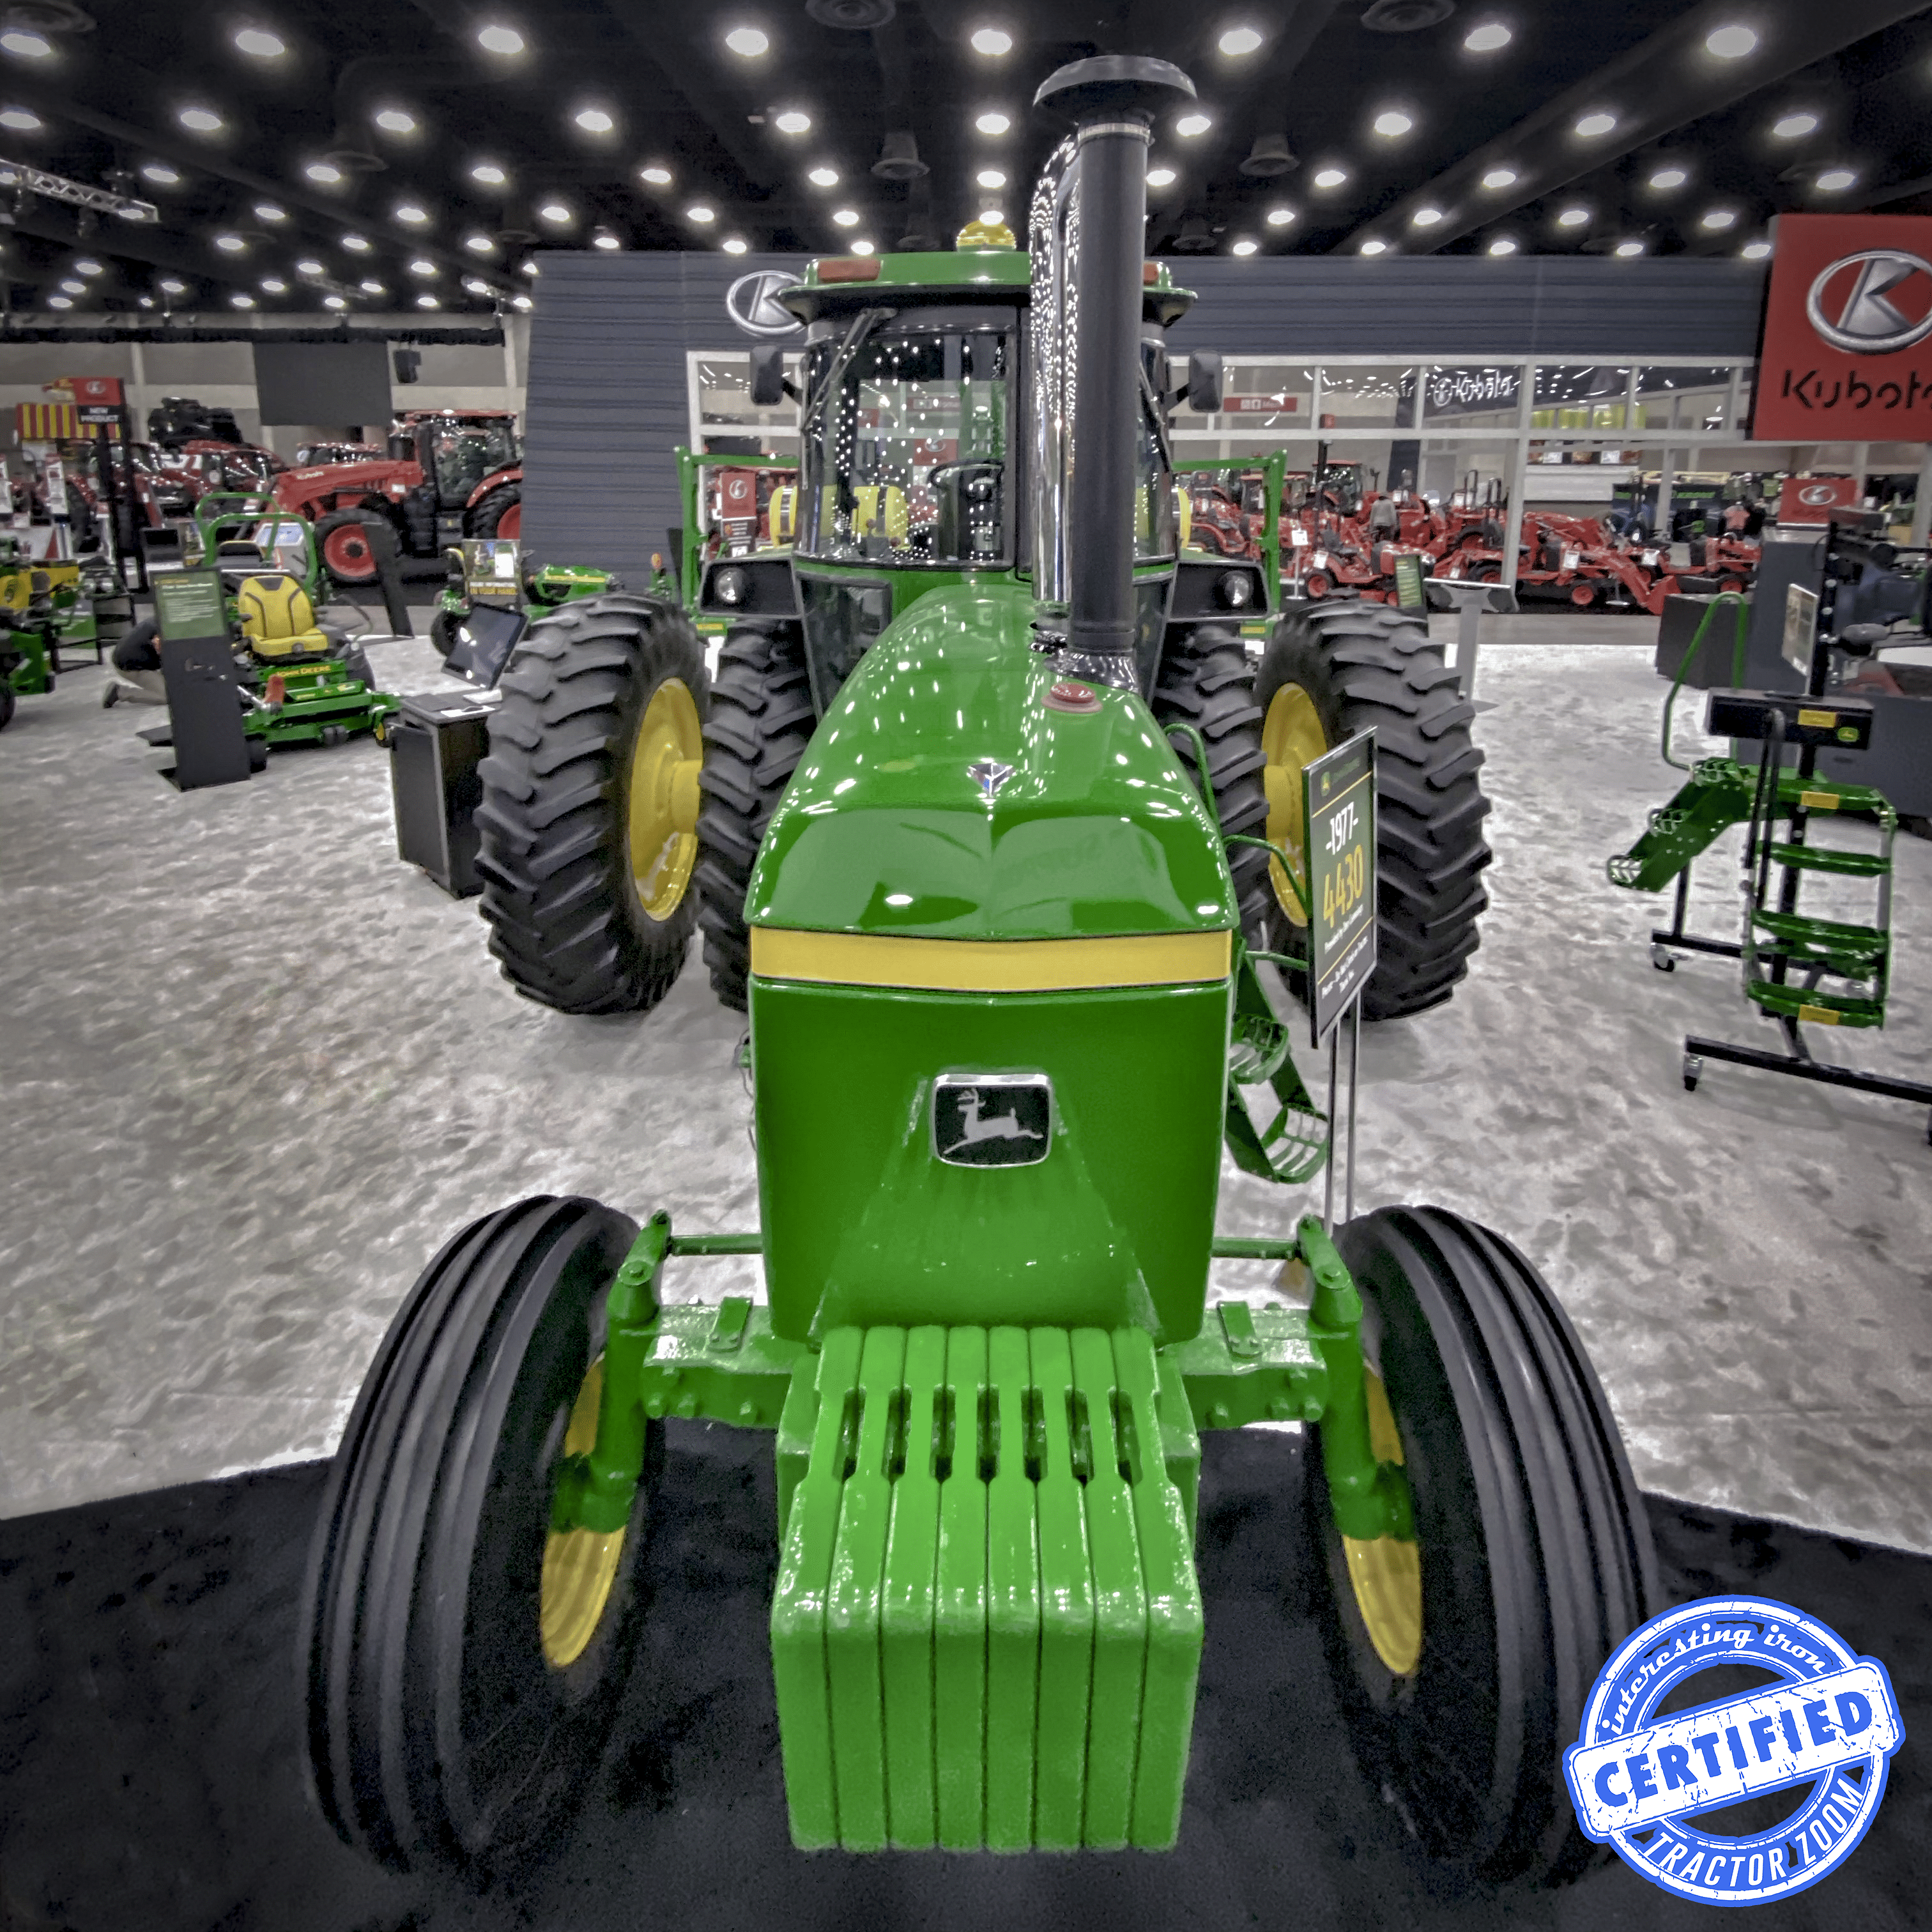 The most famous 4430 in Farm Show history